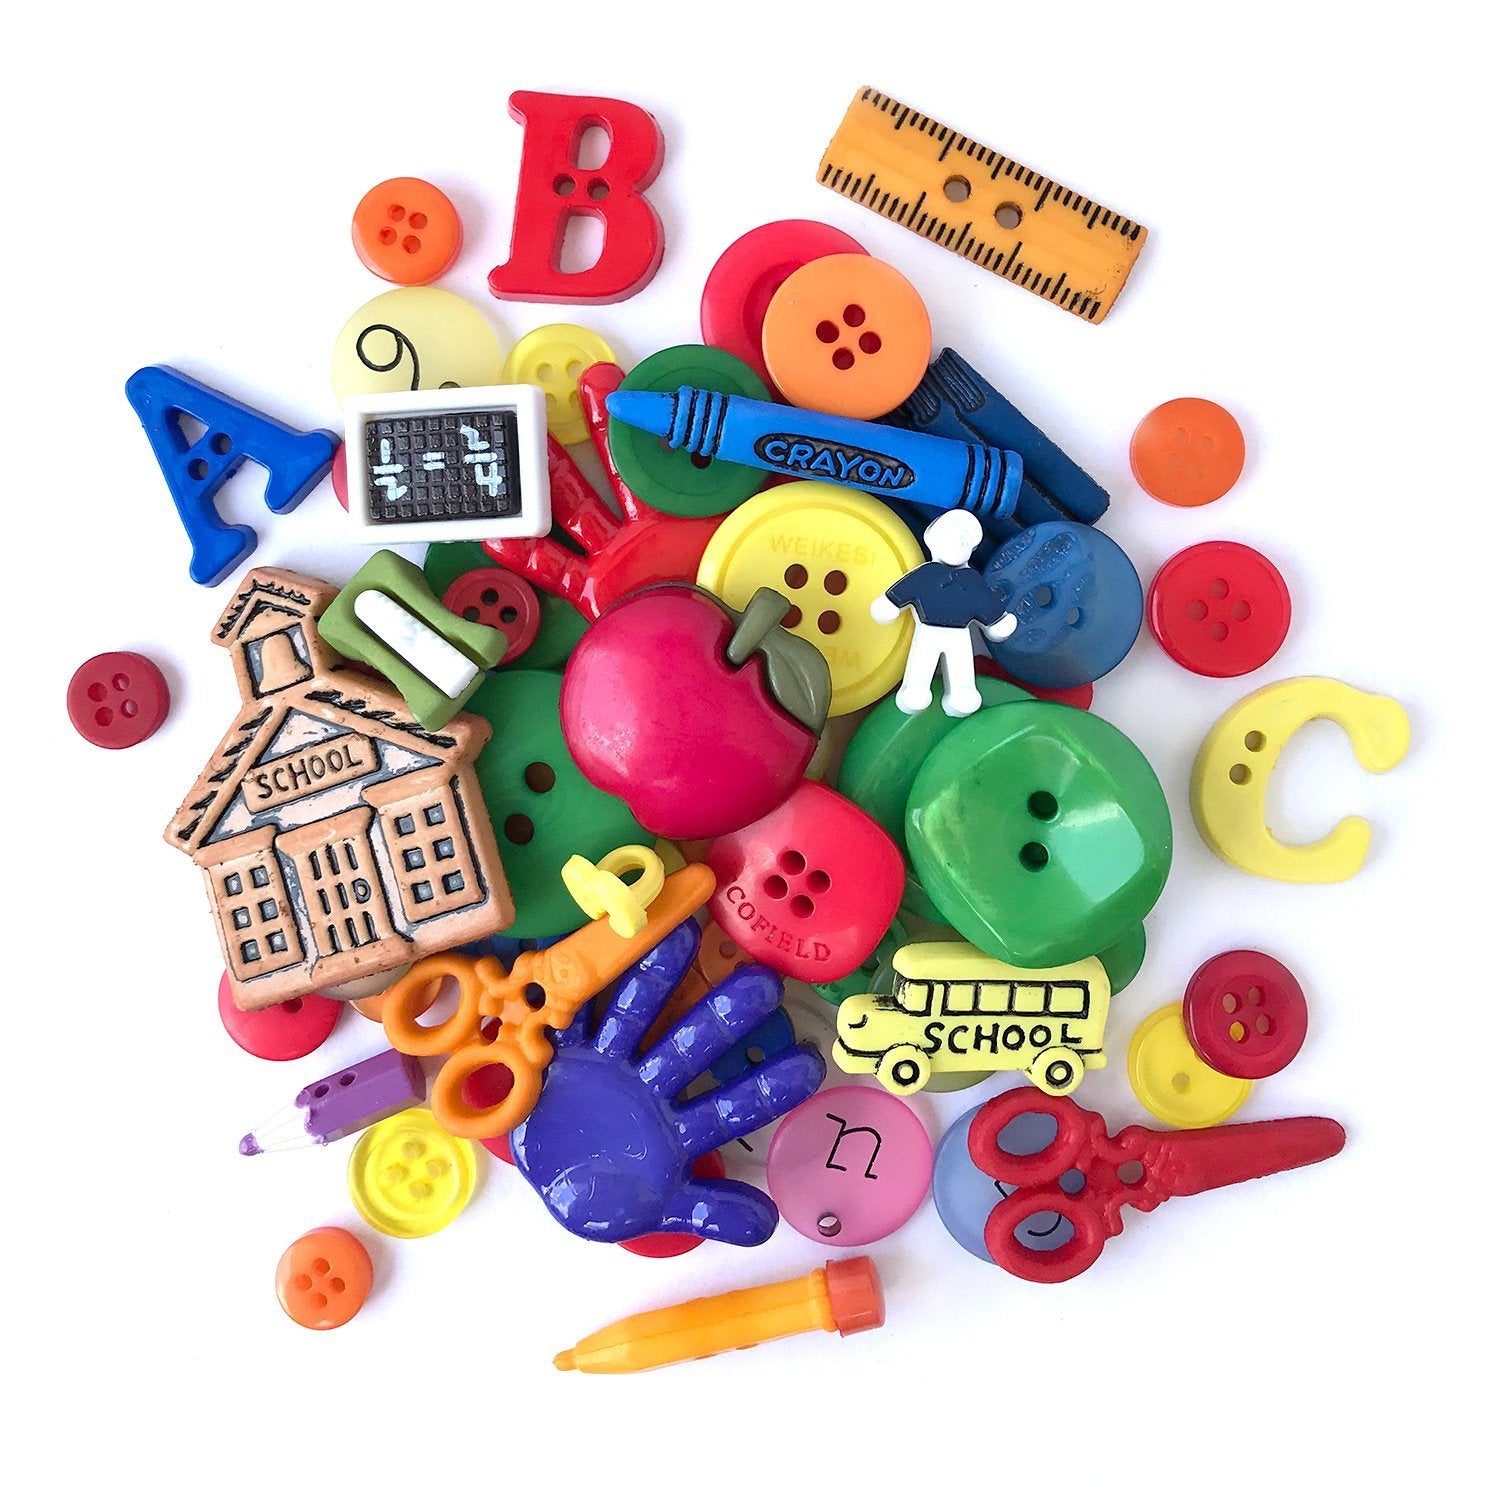 Buttons Galore and More 50+ Novelty Buttons for Sewing and Crafts School Theme Buttons